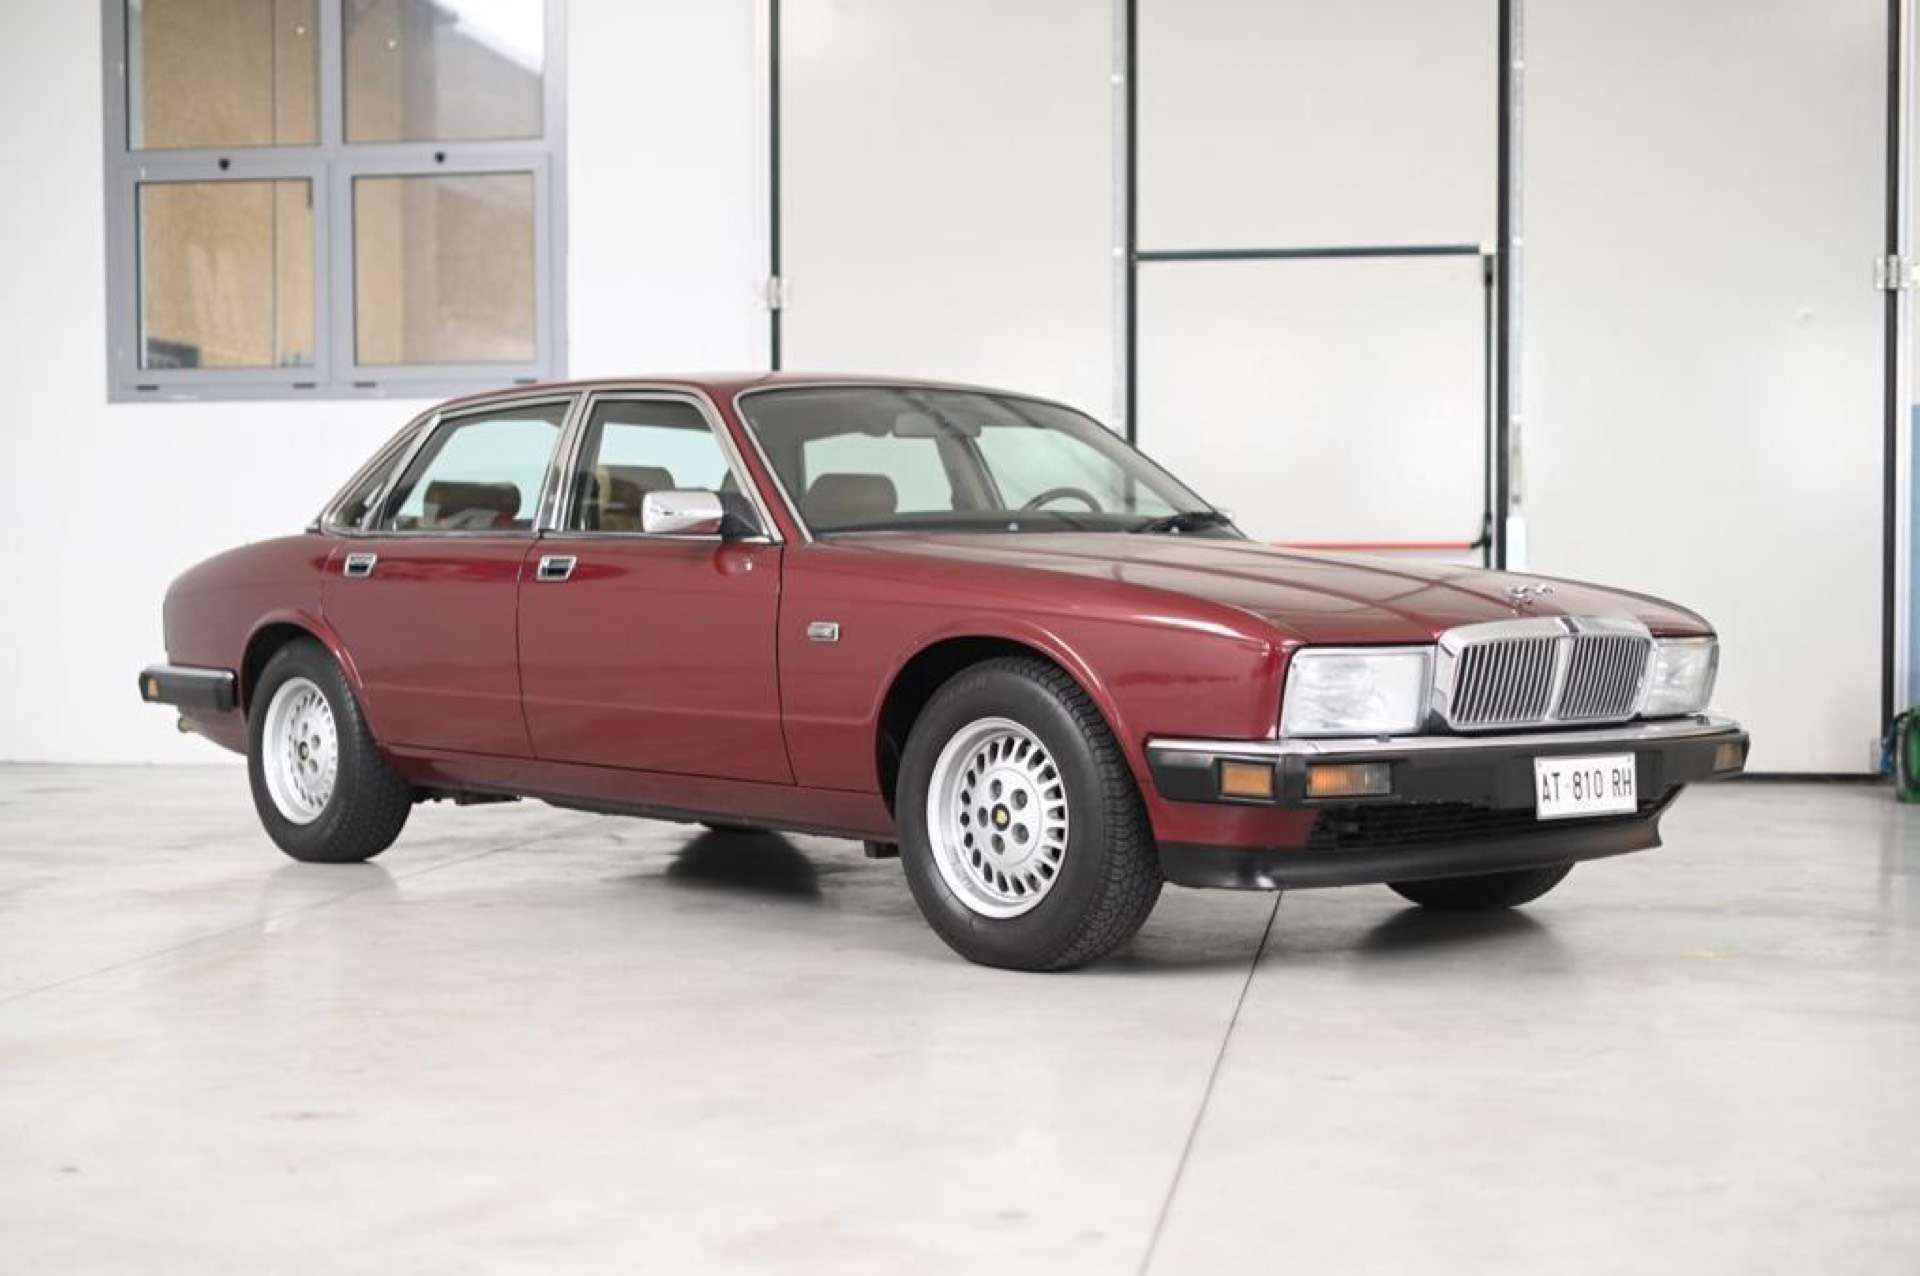 Daimler Sovereign Other in Red used in Sulzano - Brescia - Bs for € 7,000.-